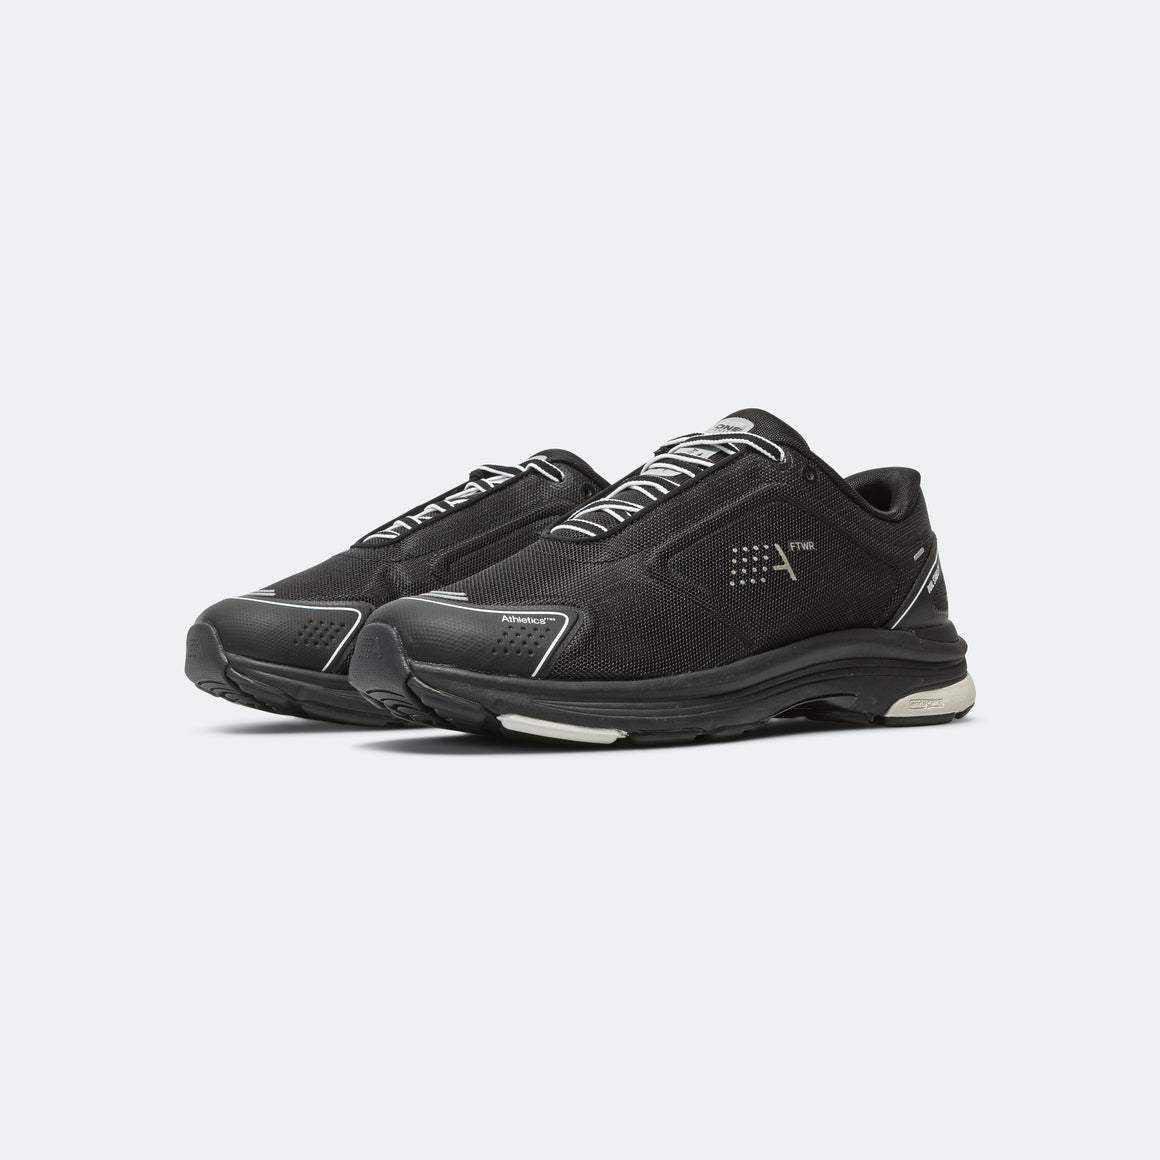 Athletics Footwear - One Remastered - Black/Grey Racer - UP THERE